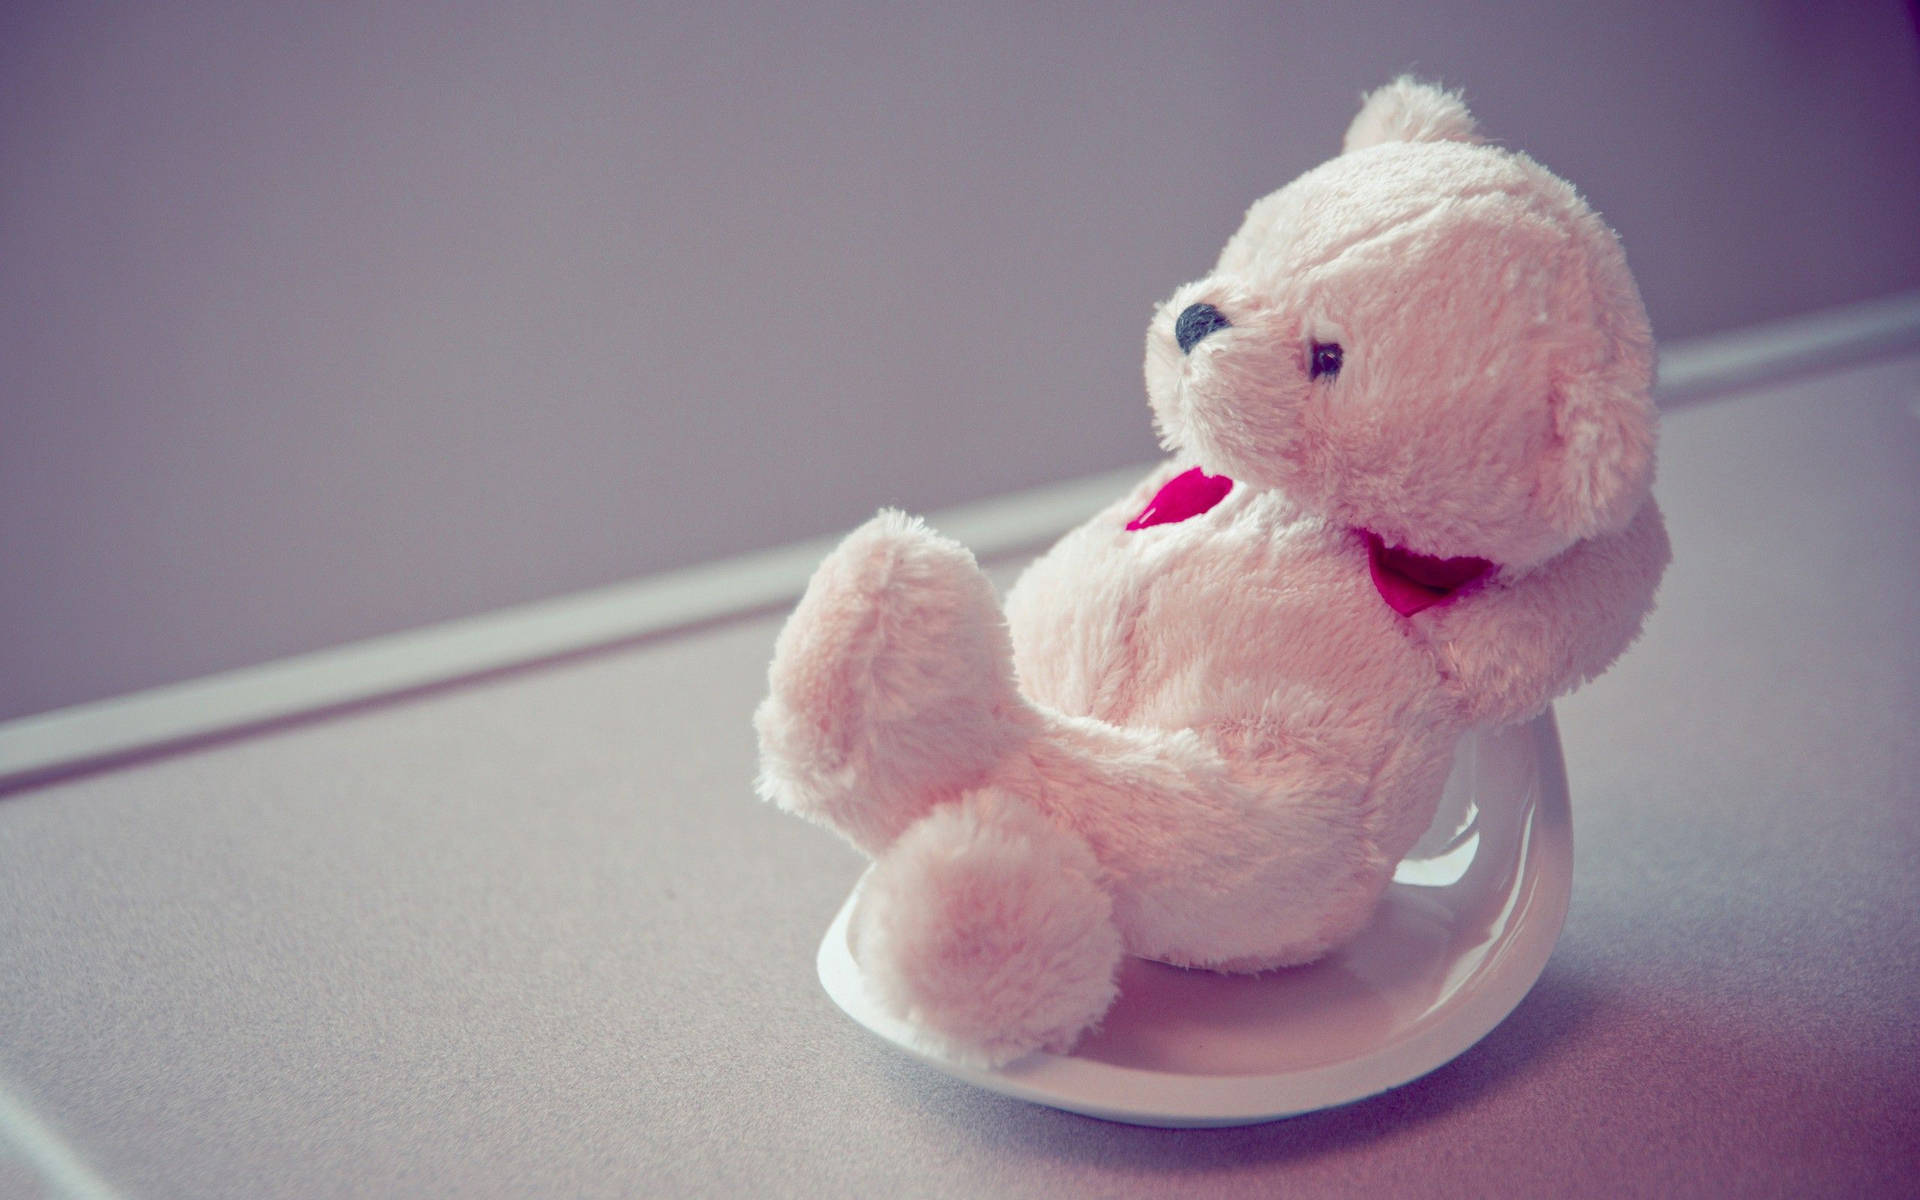 A Sweet Day With My Cuddly Teddy Bear Wallpaper